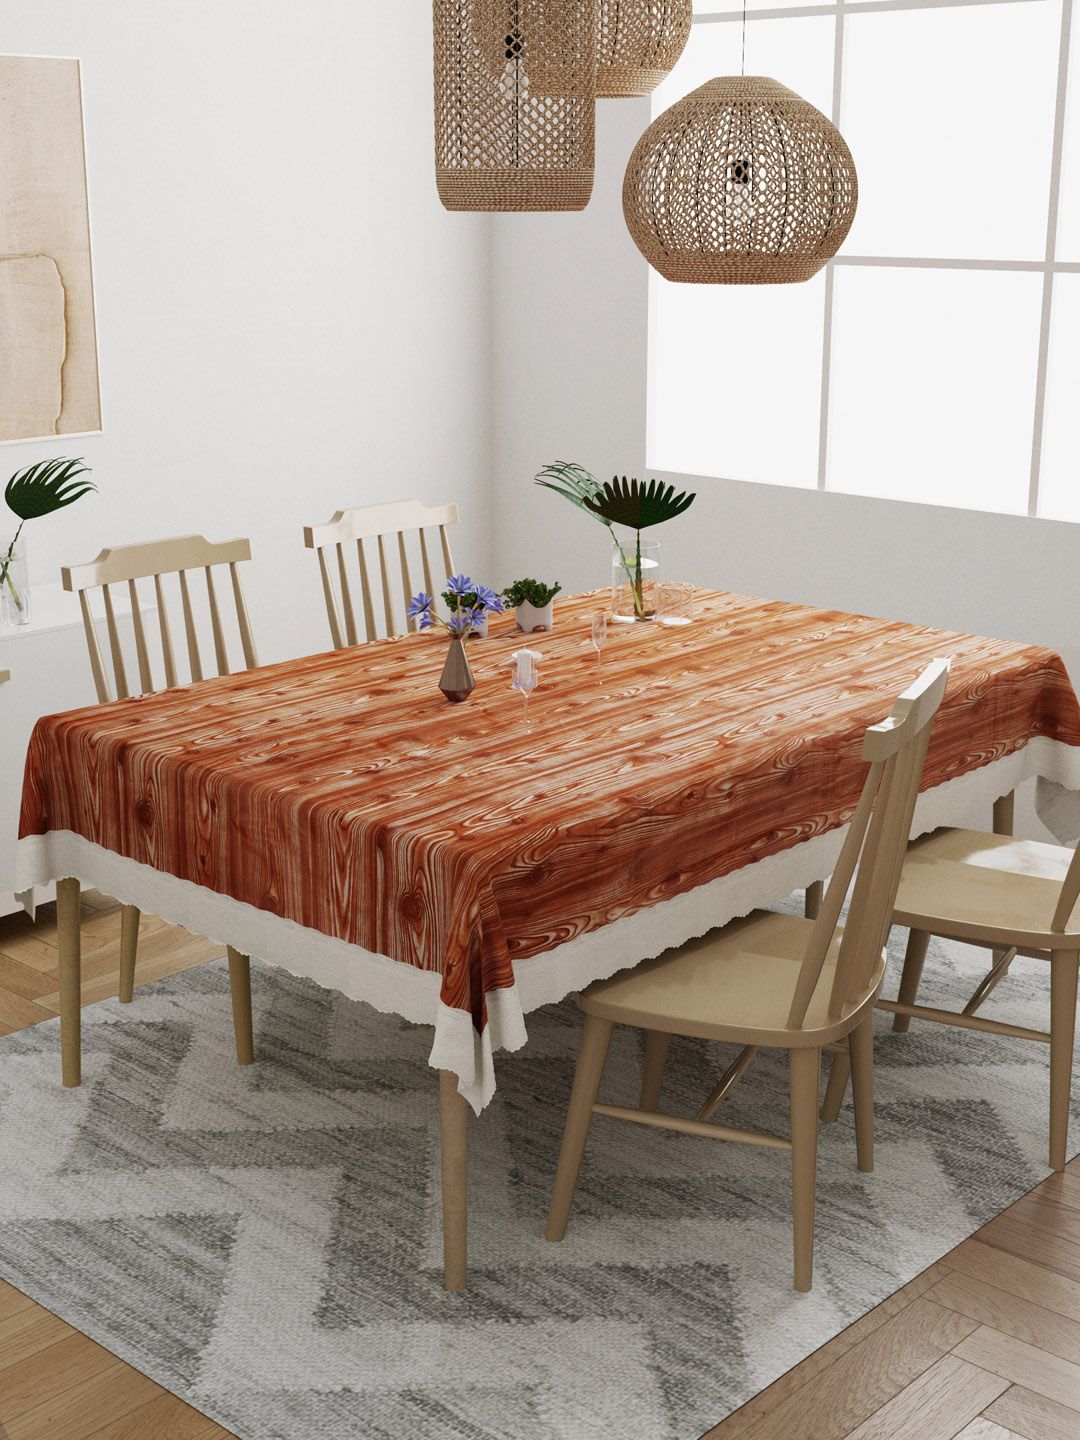 DREAM WEAVERZ Tan Brown Printed Rectangle 4 Seater Dining Table Covers Price in India